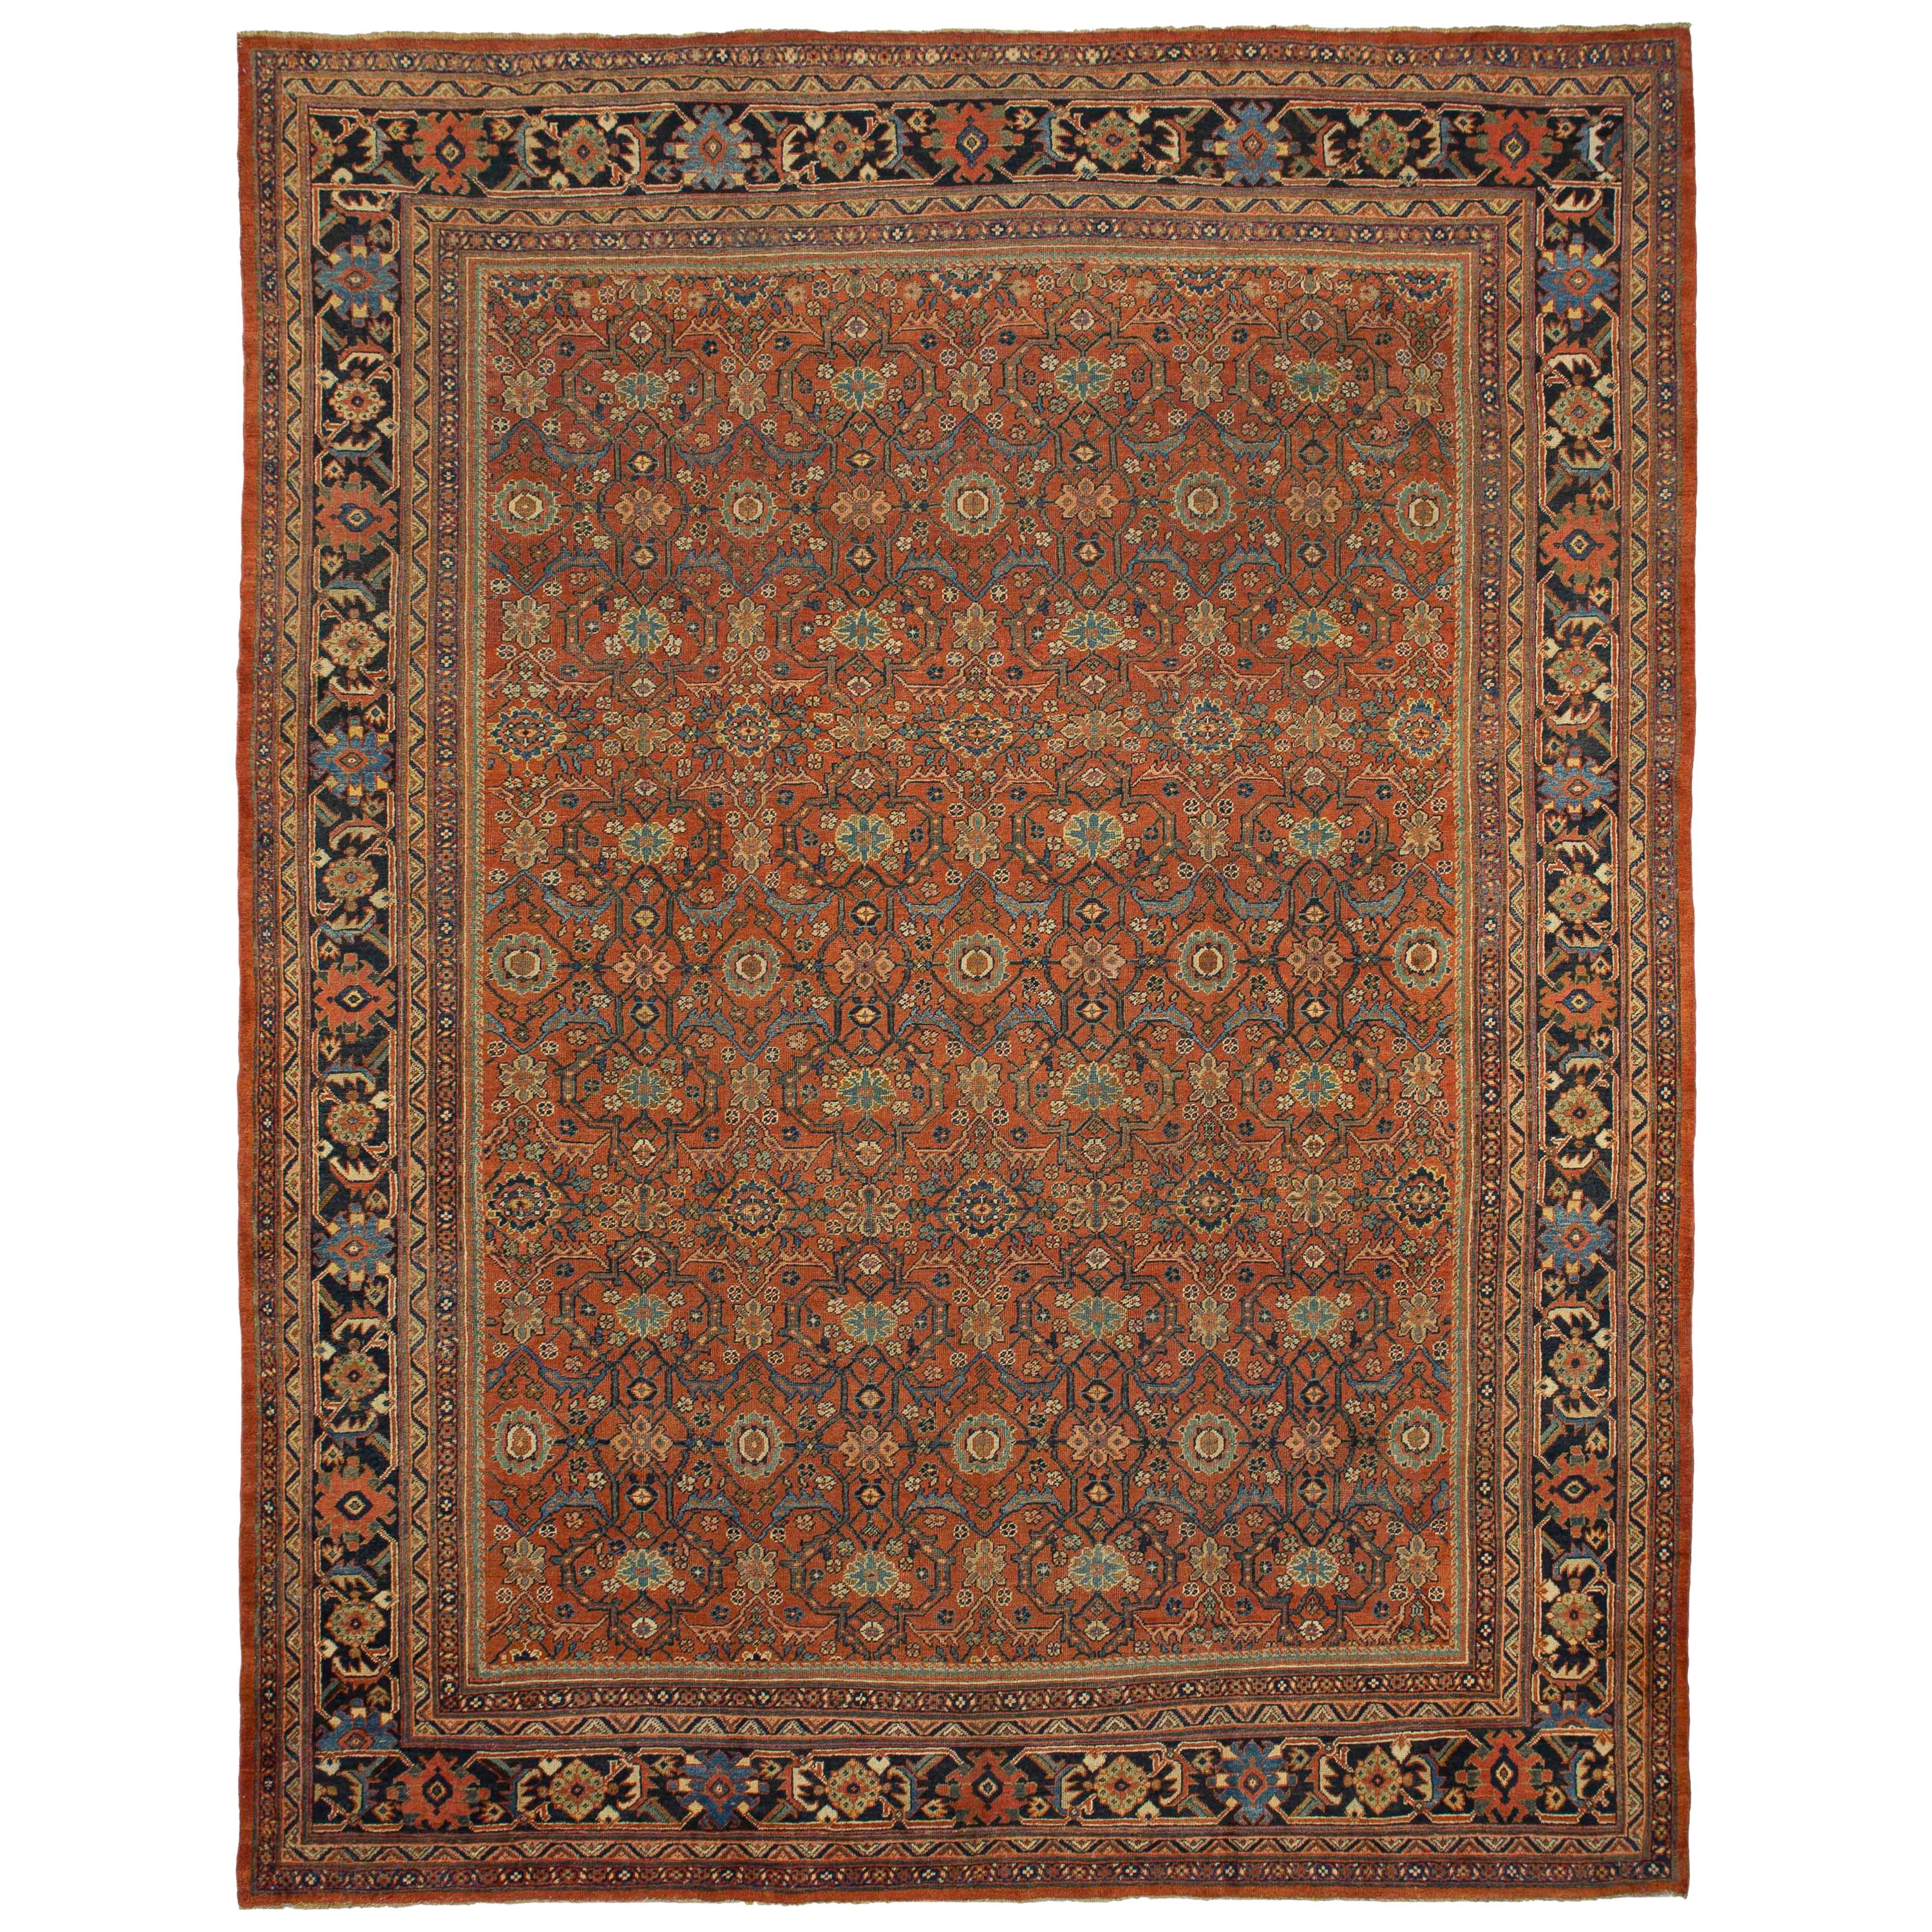 Antique Sultanabad Persian Rug with Bold Tribal Patterns, circa 1930s 